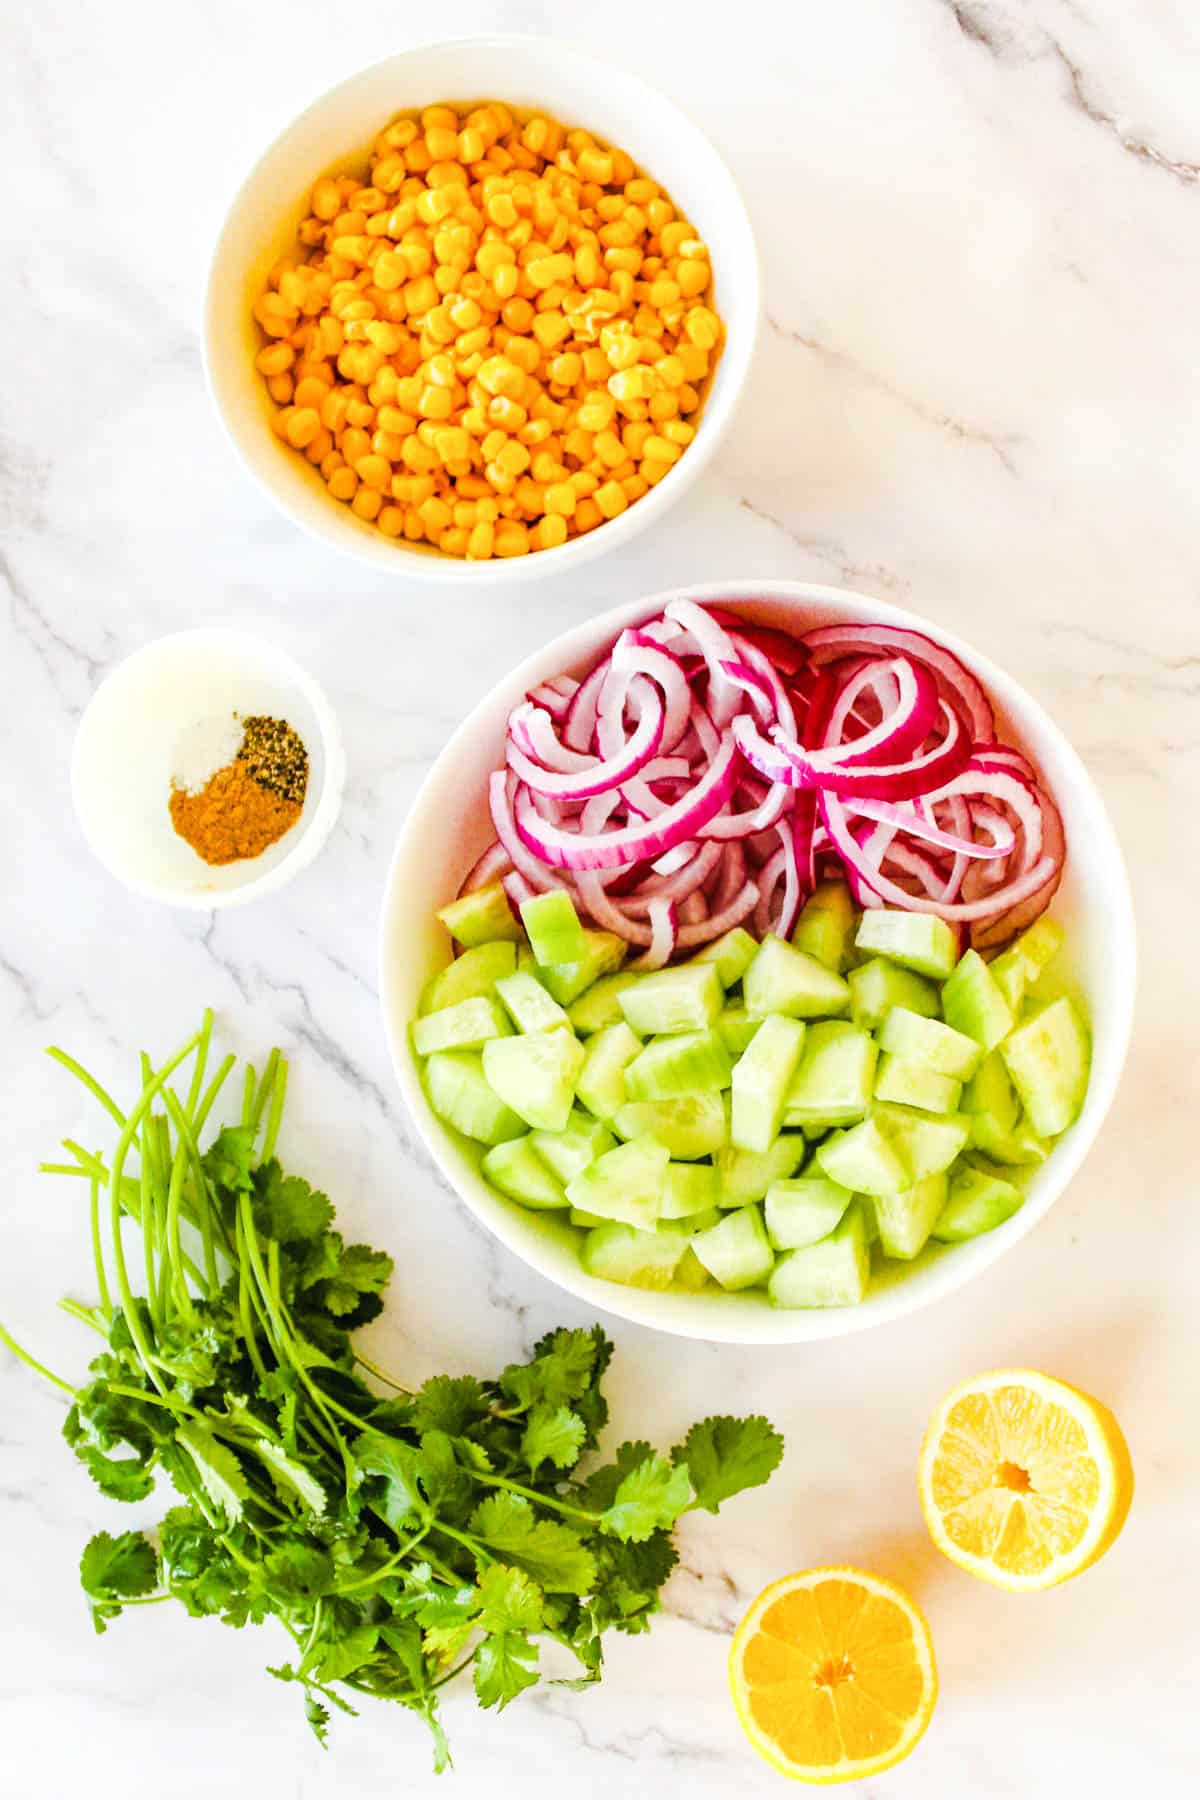 Ingredients needed to make corn and cucumber salad.